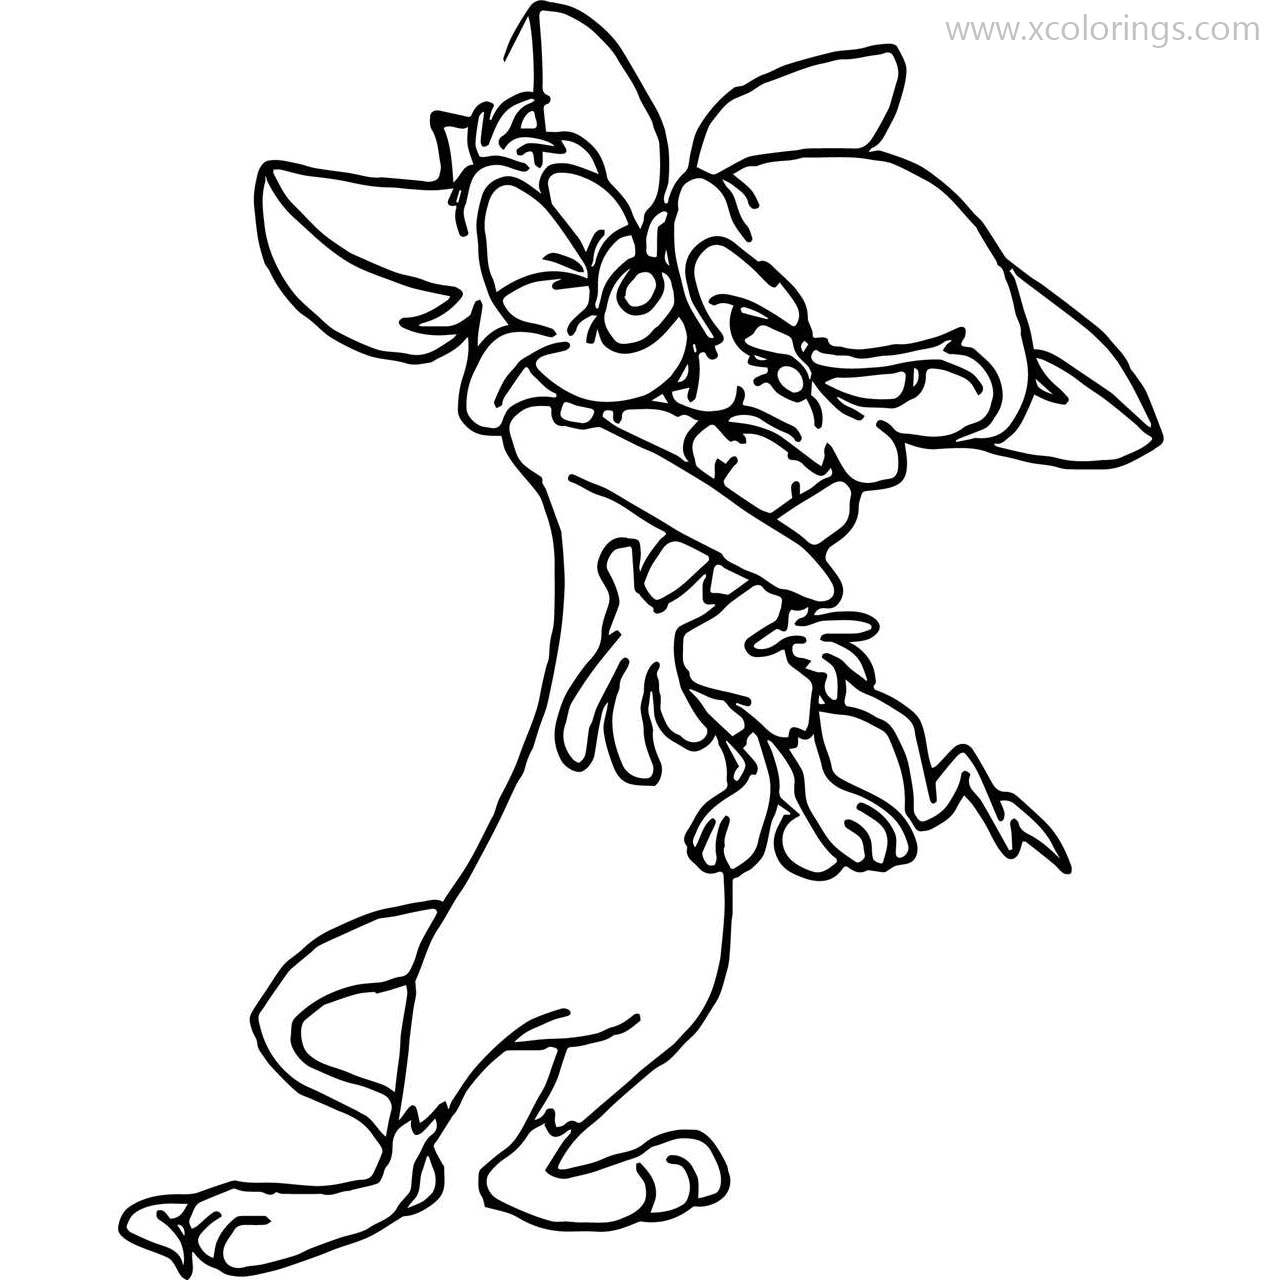 Free Animaniacs Coloring Pages Pinky and the Brain printable